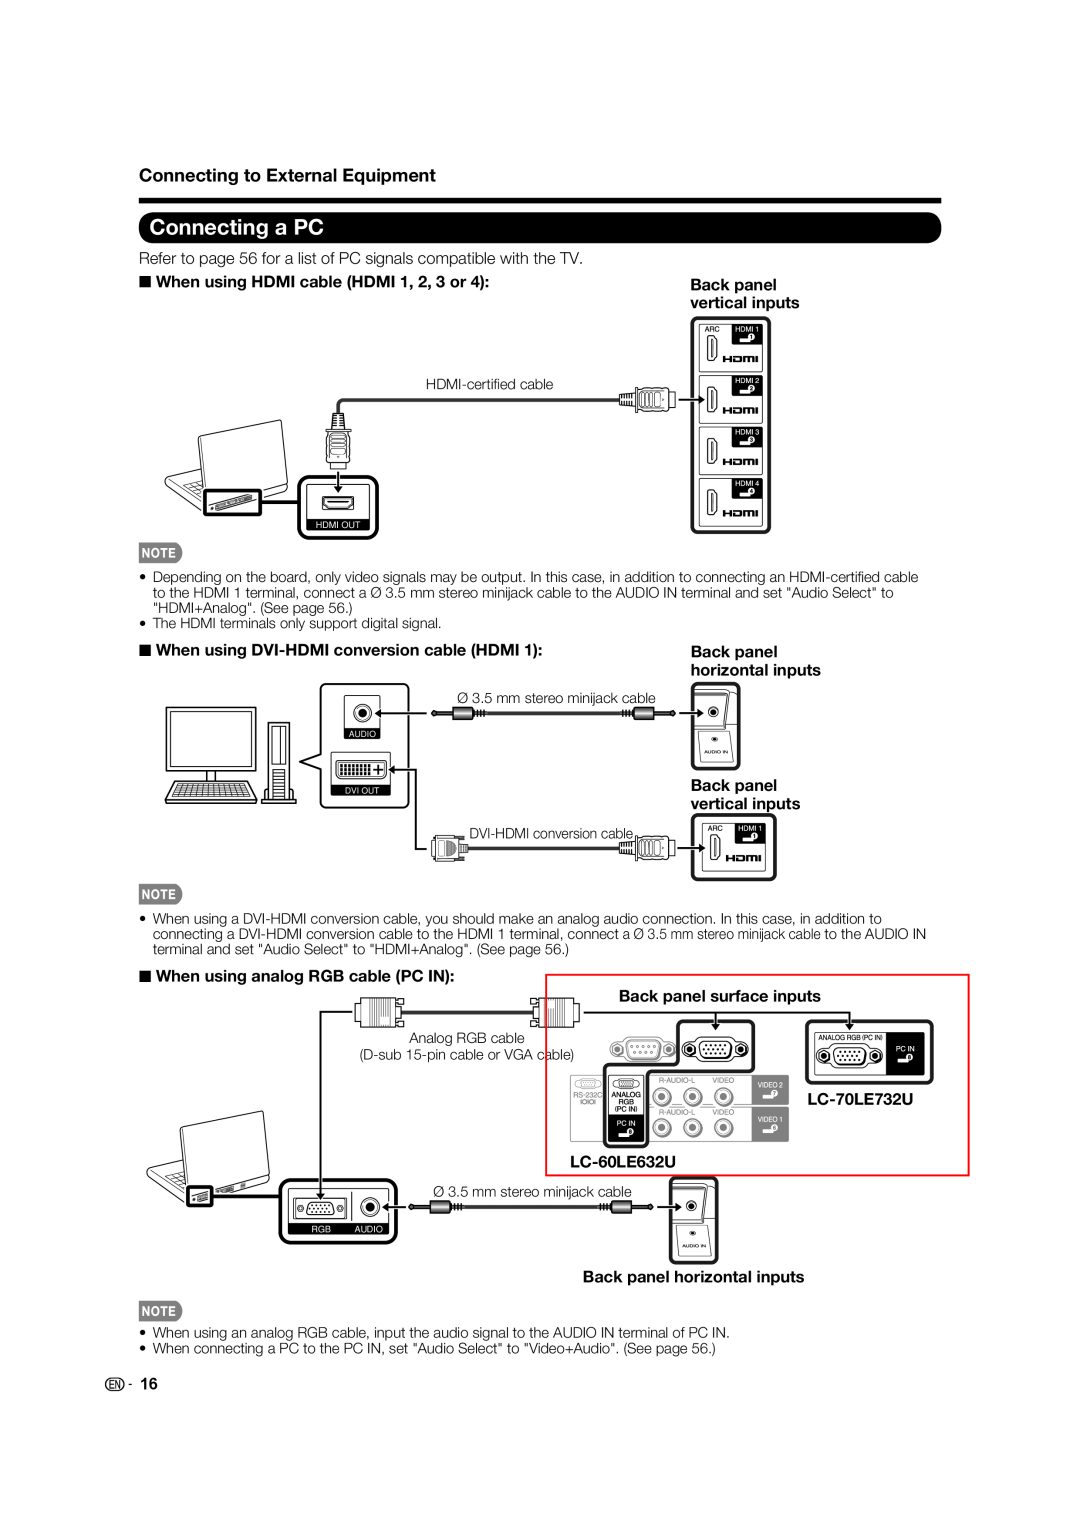 Sharp operation manual Connecting a PC, Back panel horizontal inputs Back panel vertical inputs, LC-70LE732U LC-60LE632U 